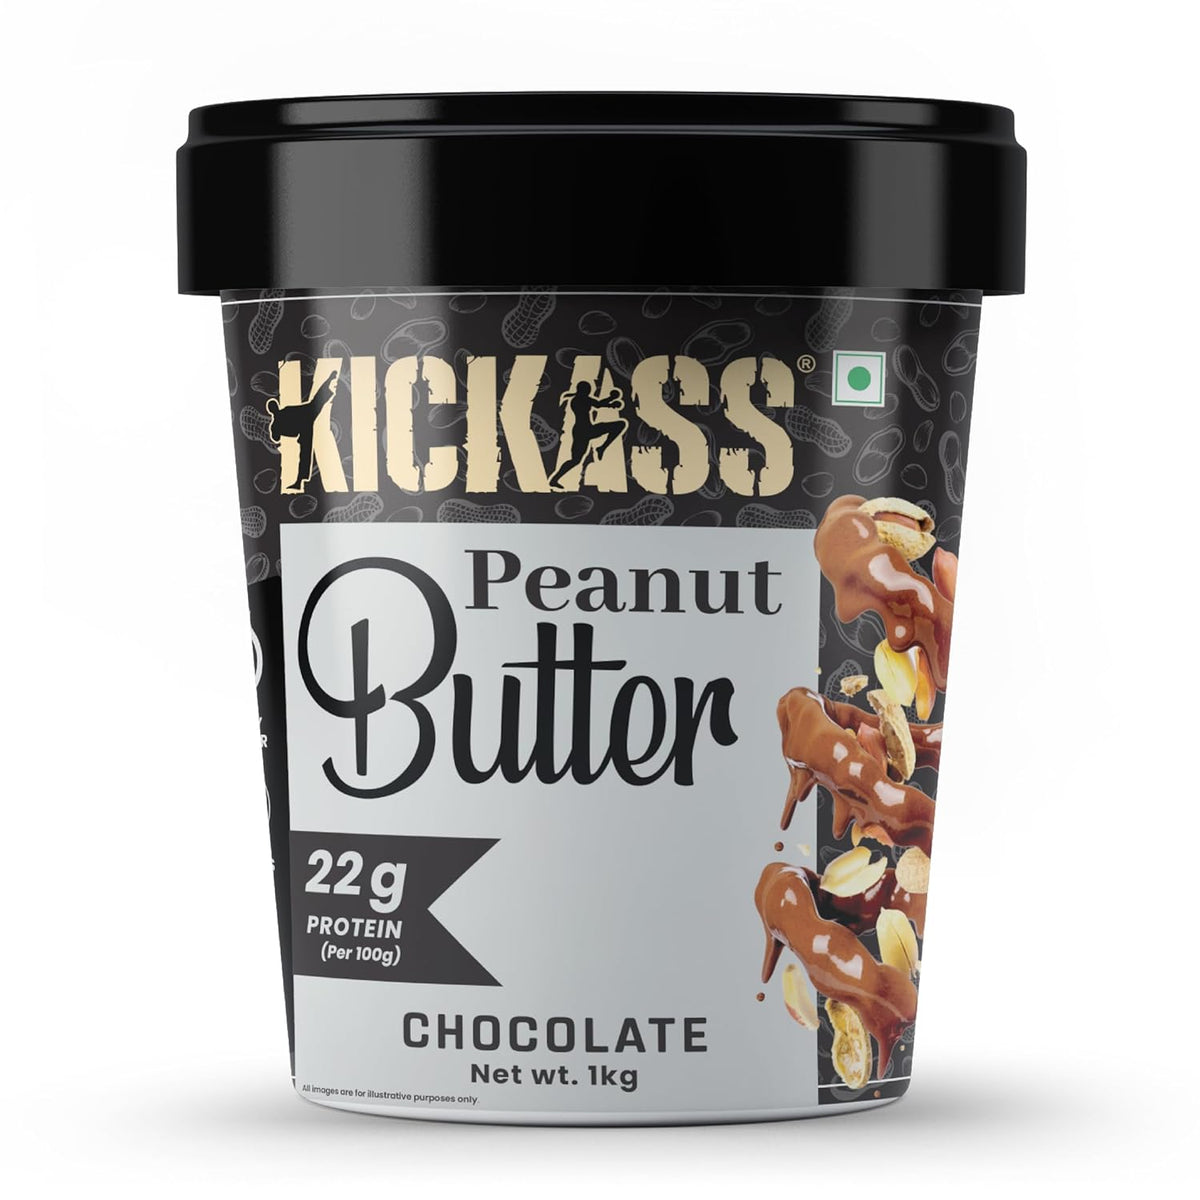 Kickass Chocolate Peanut Butter Powered by Probiotic | Energy Booster - 1Kg